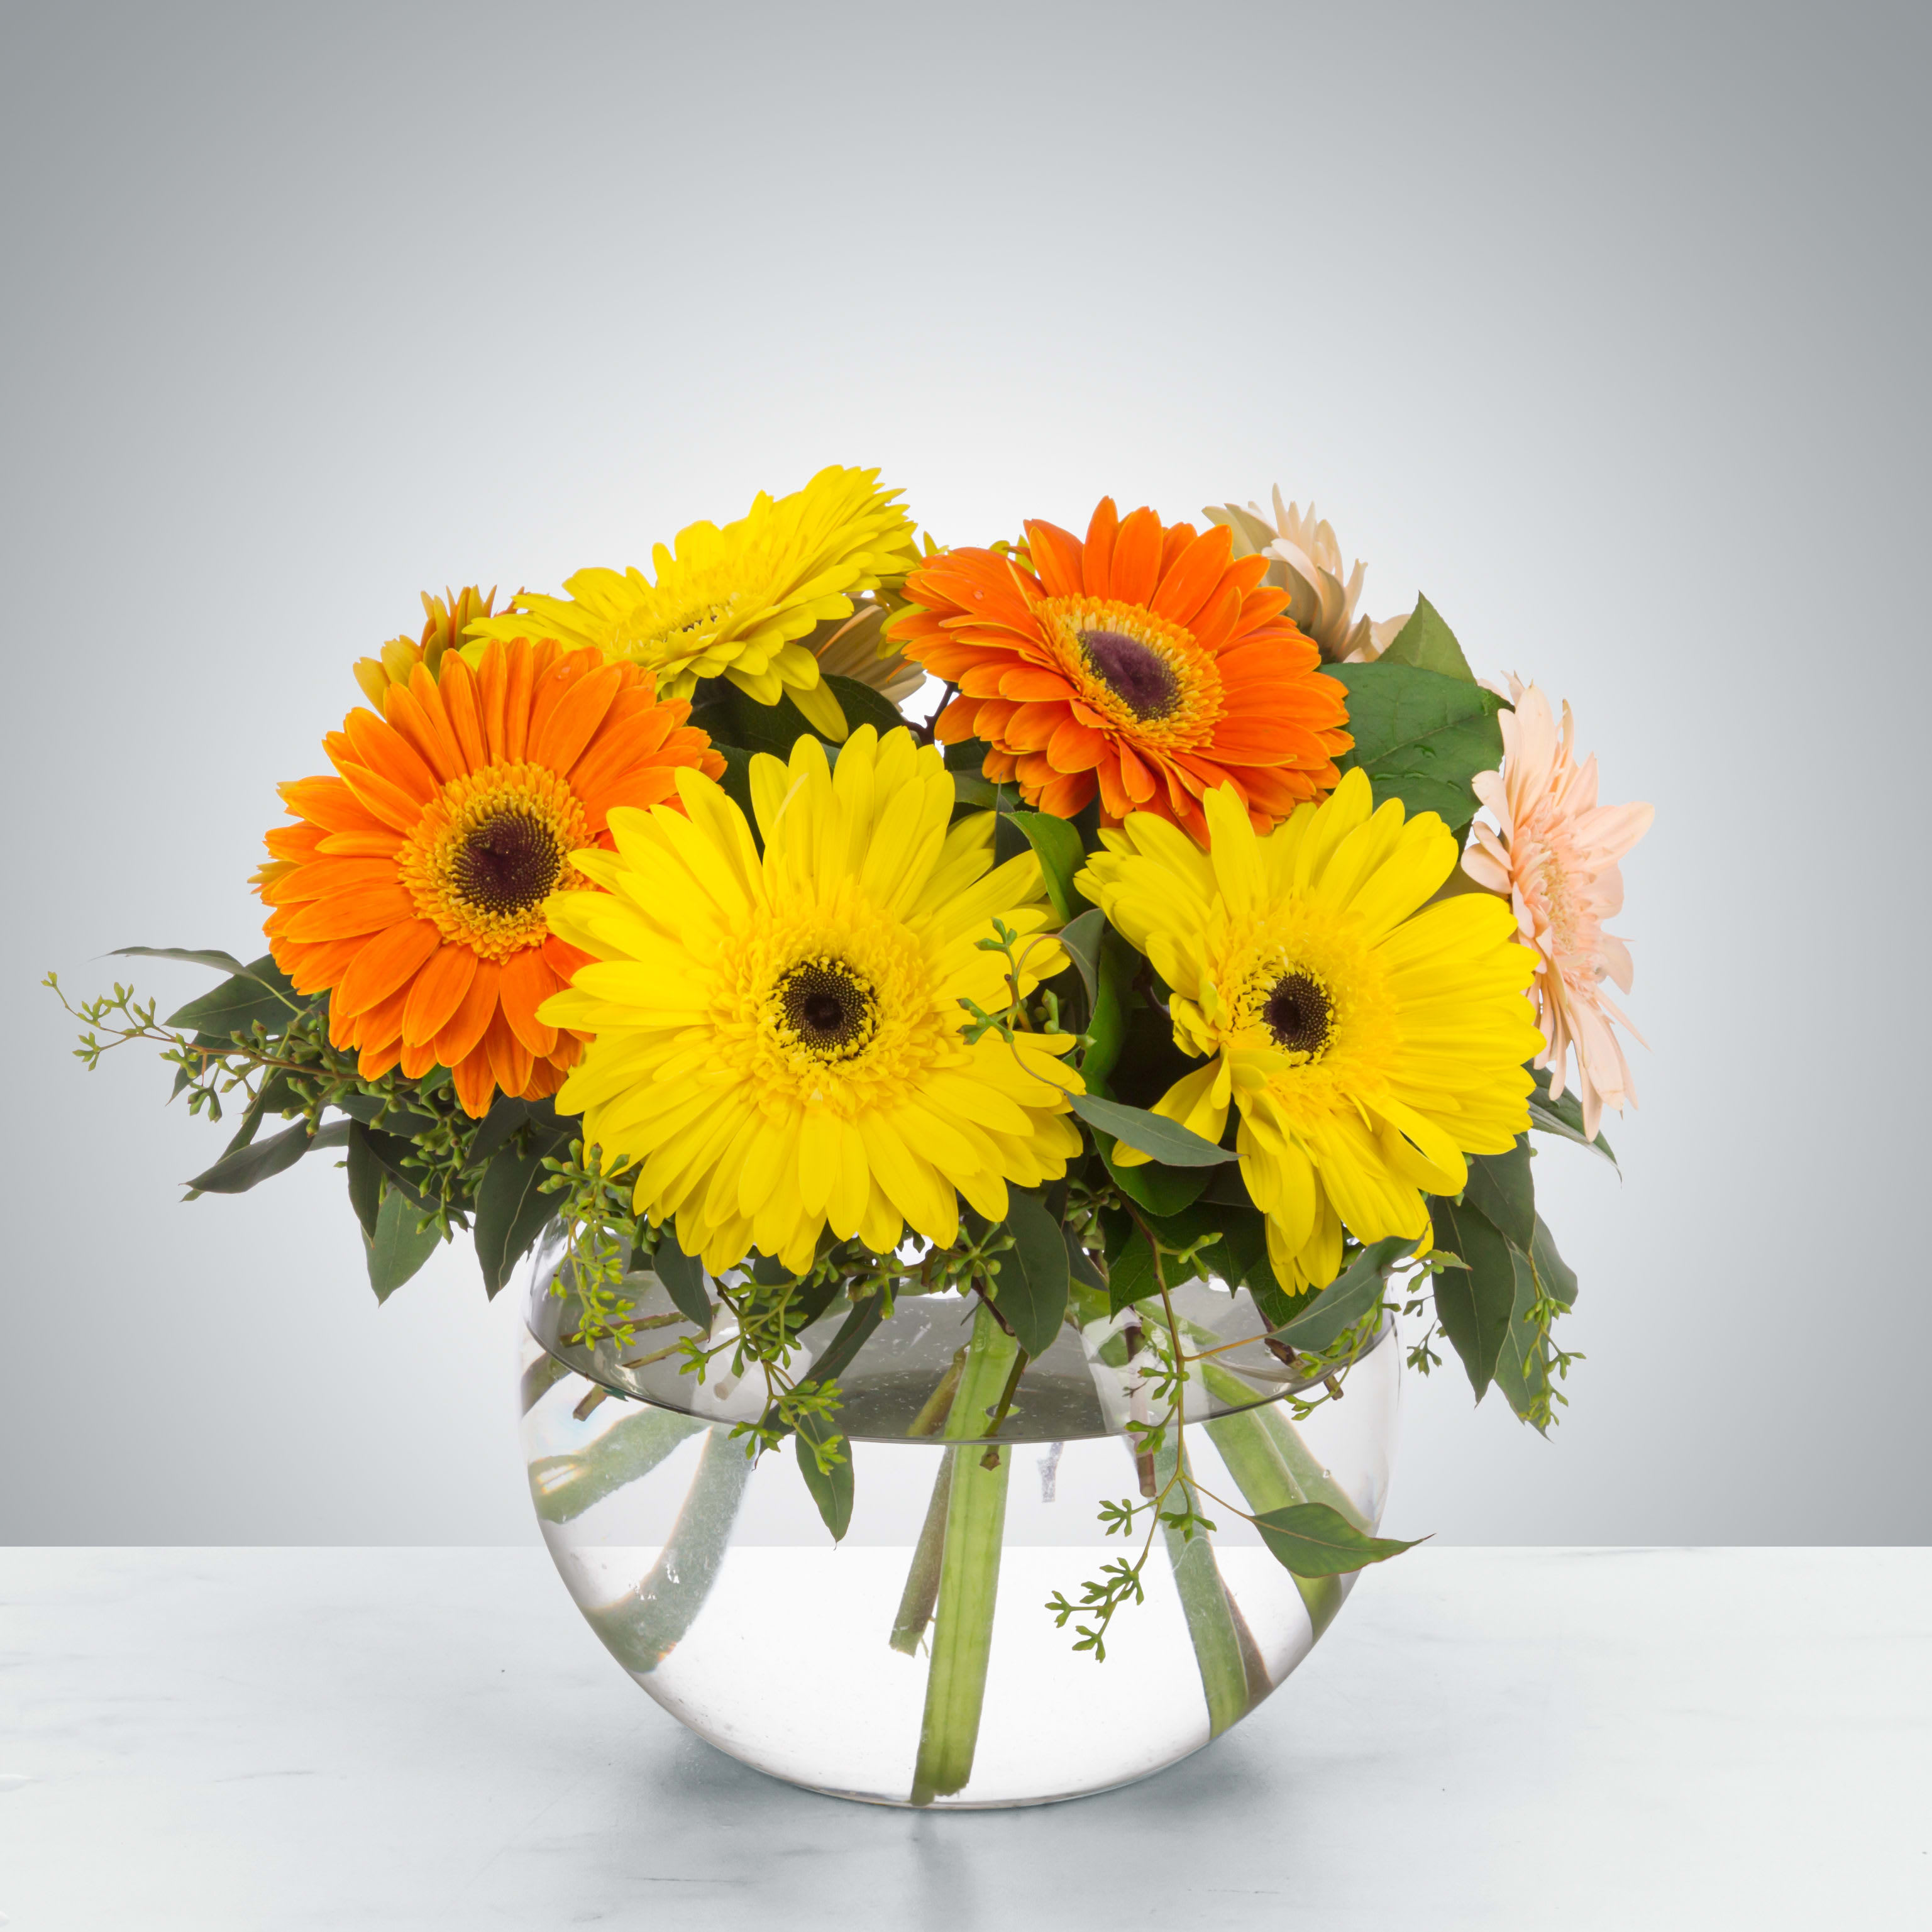 Dazzling Daisy Bowl by BloomNation™ - An instant brightener, send somebody a bowl full of Gerbera Daisies. To quote Kathleen Kelly &quot;They're so friendly. Don't you think daisies are the friendliest flower?&quot;. Gerbera Daisies make a perfect just because gift or birthday wishes.  1st Image: Standard 2nd Image: Premium